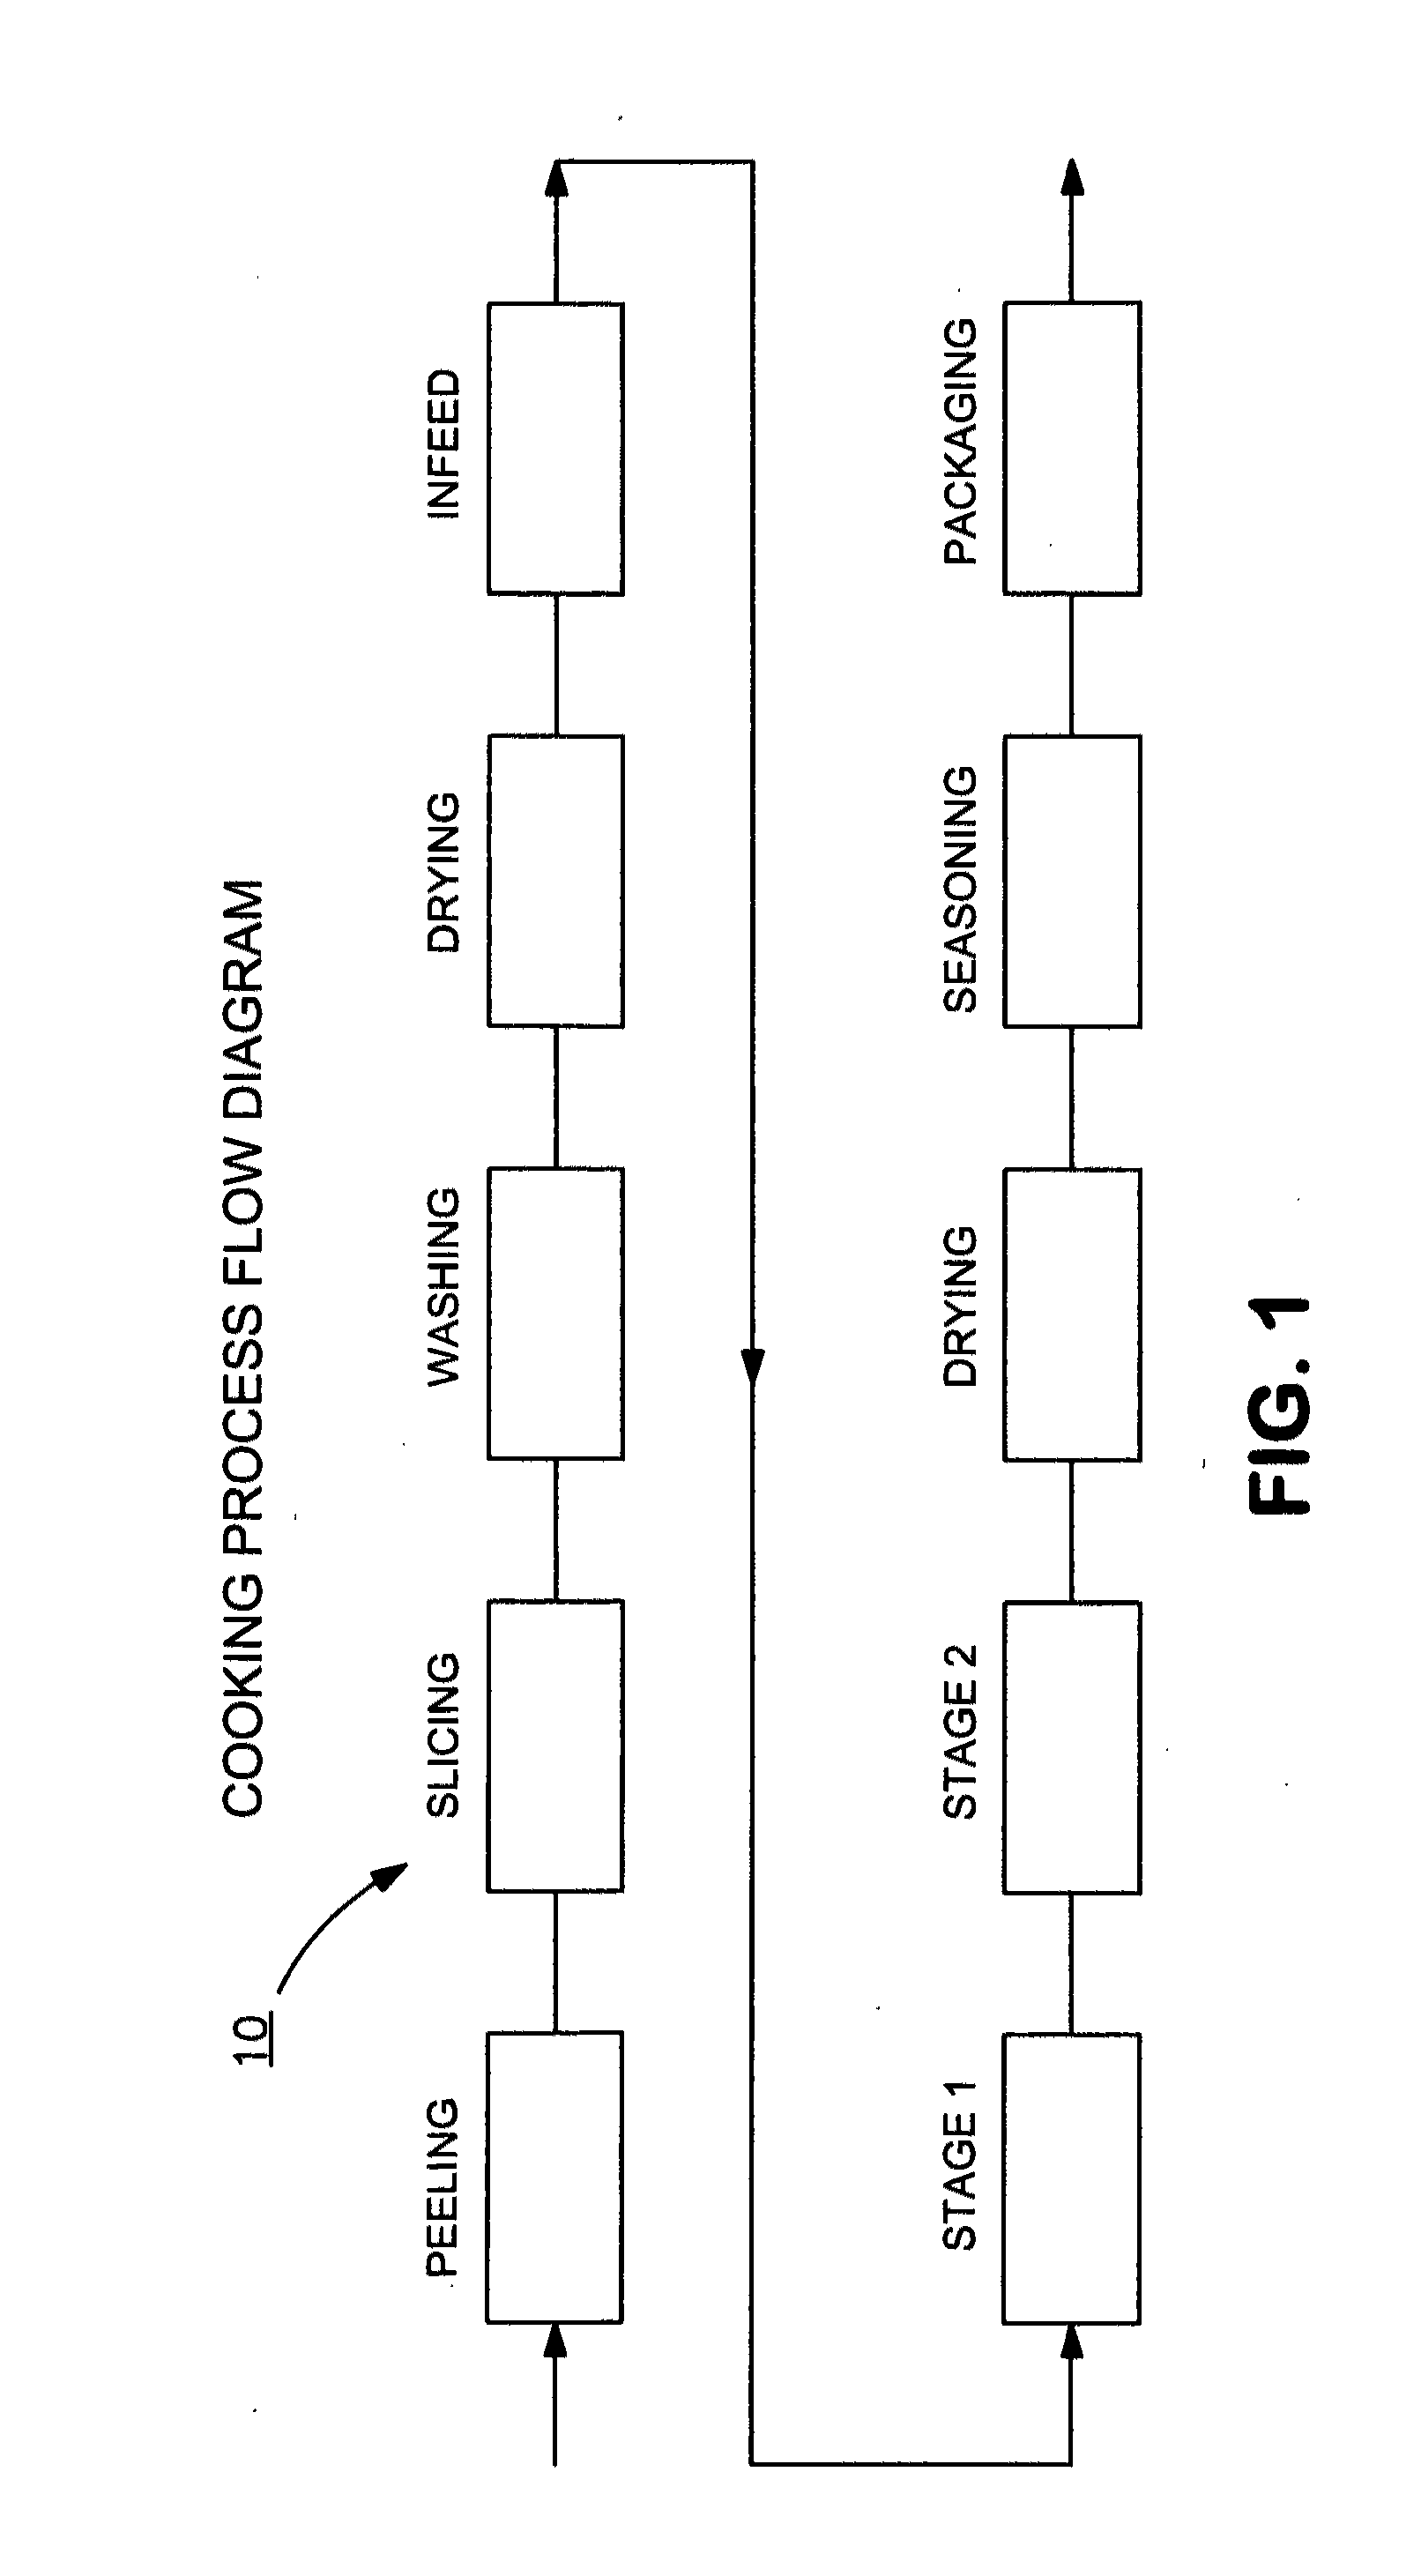 Method and apparatus for oil-free production of food products in a rotary impingement oven